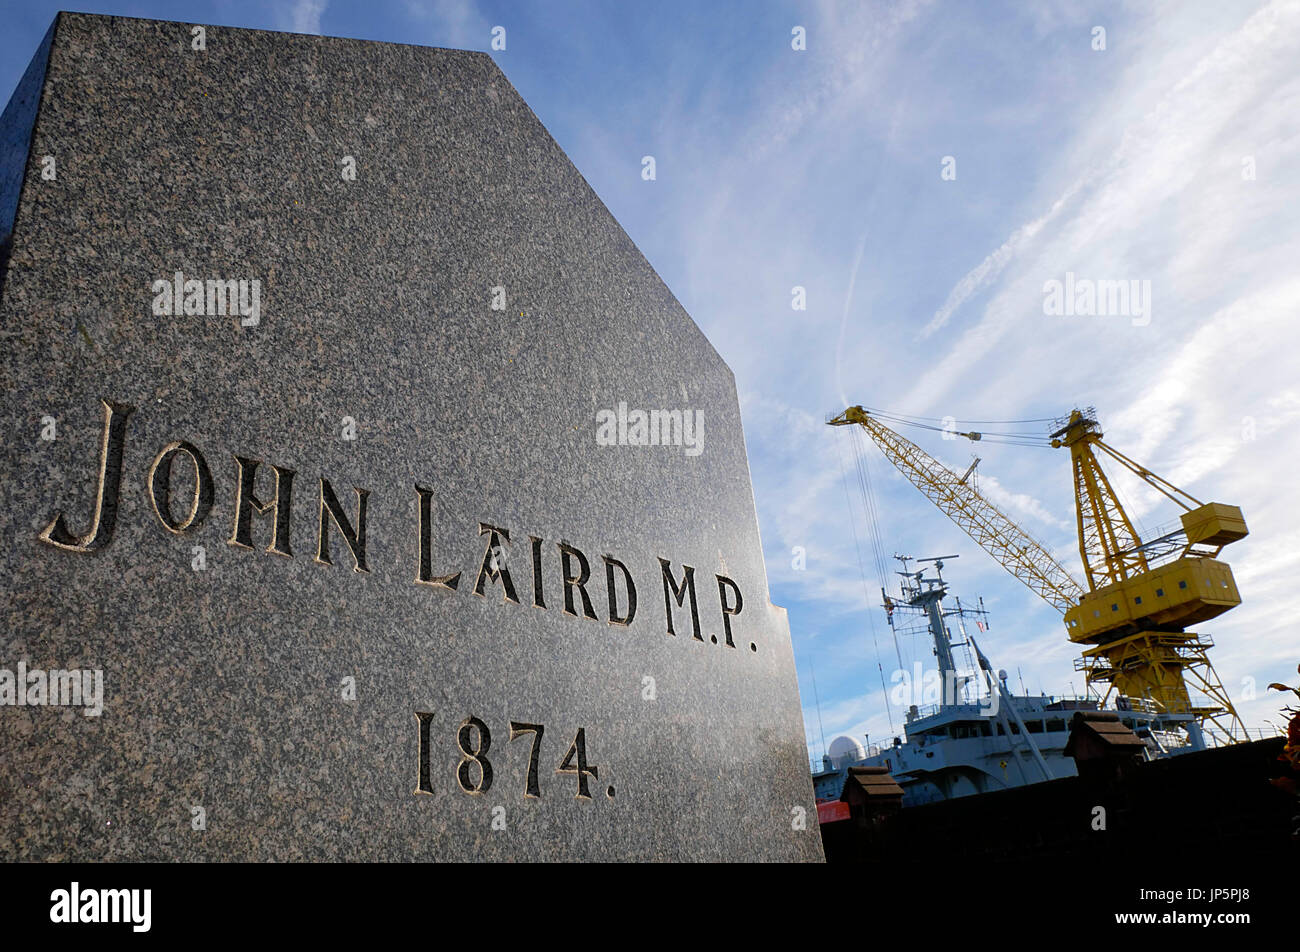 Gravestone of the great British Shipbuilder John Laird M.P., of Birkenhead who's legacy is the Cammell Laird shipyard at Birkenhead, Merseyside. Stock Photo